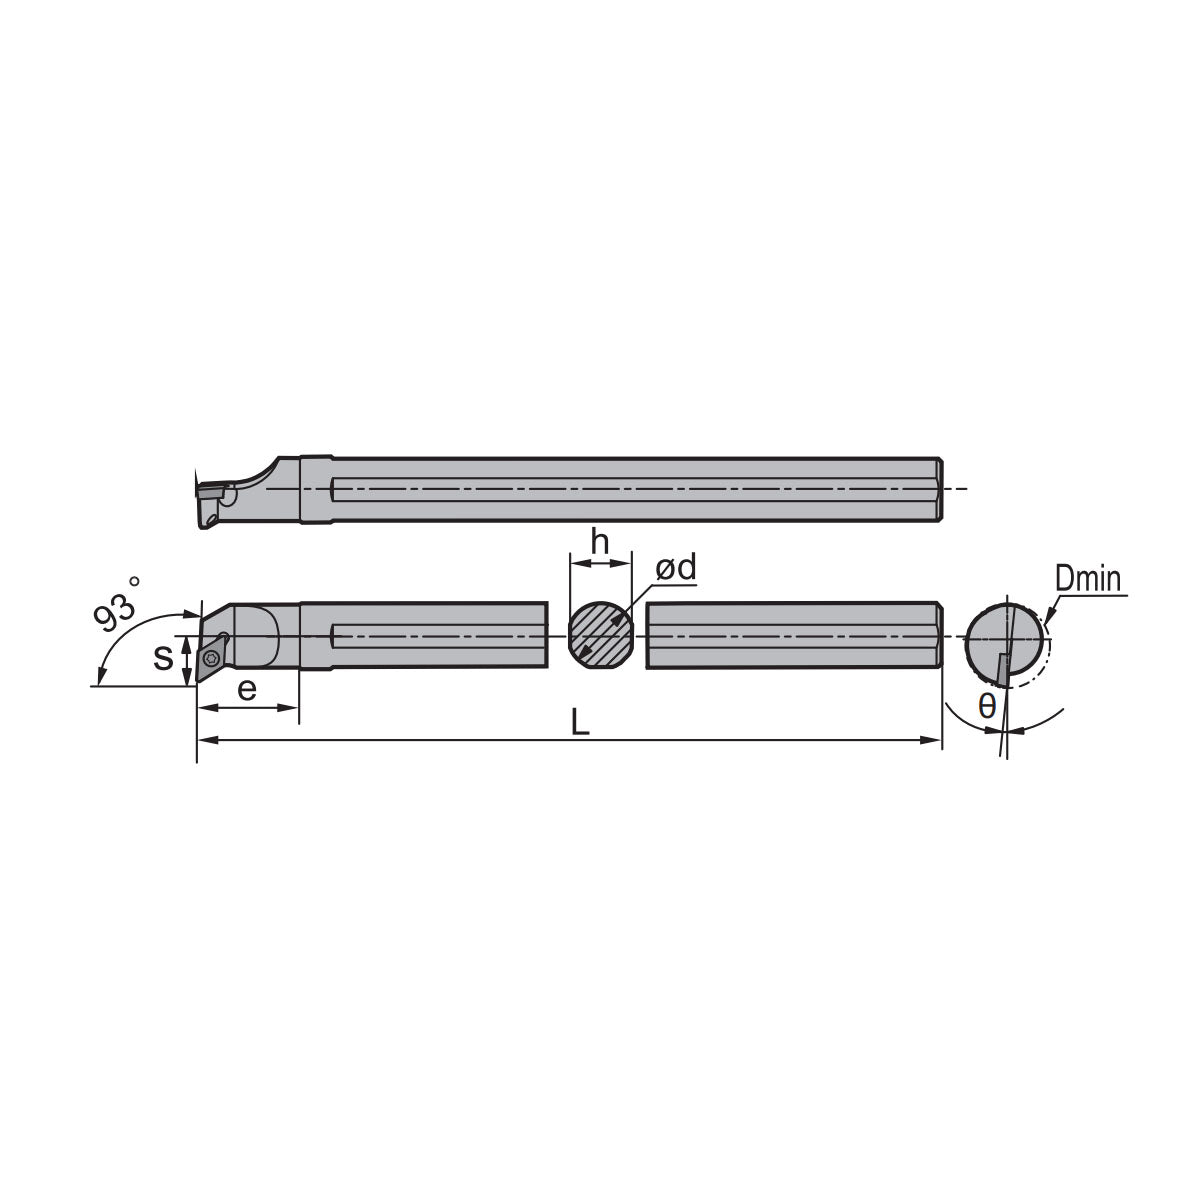 DP** Steel Boring Bar S-Clamping SDUPR/L Kr: 93° S10K S12M S16Q - Makotools Industrial Supply Tools for Metal Cutting